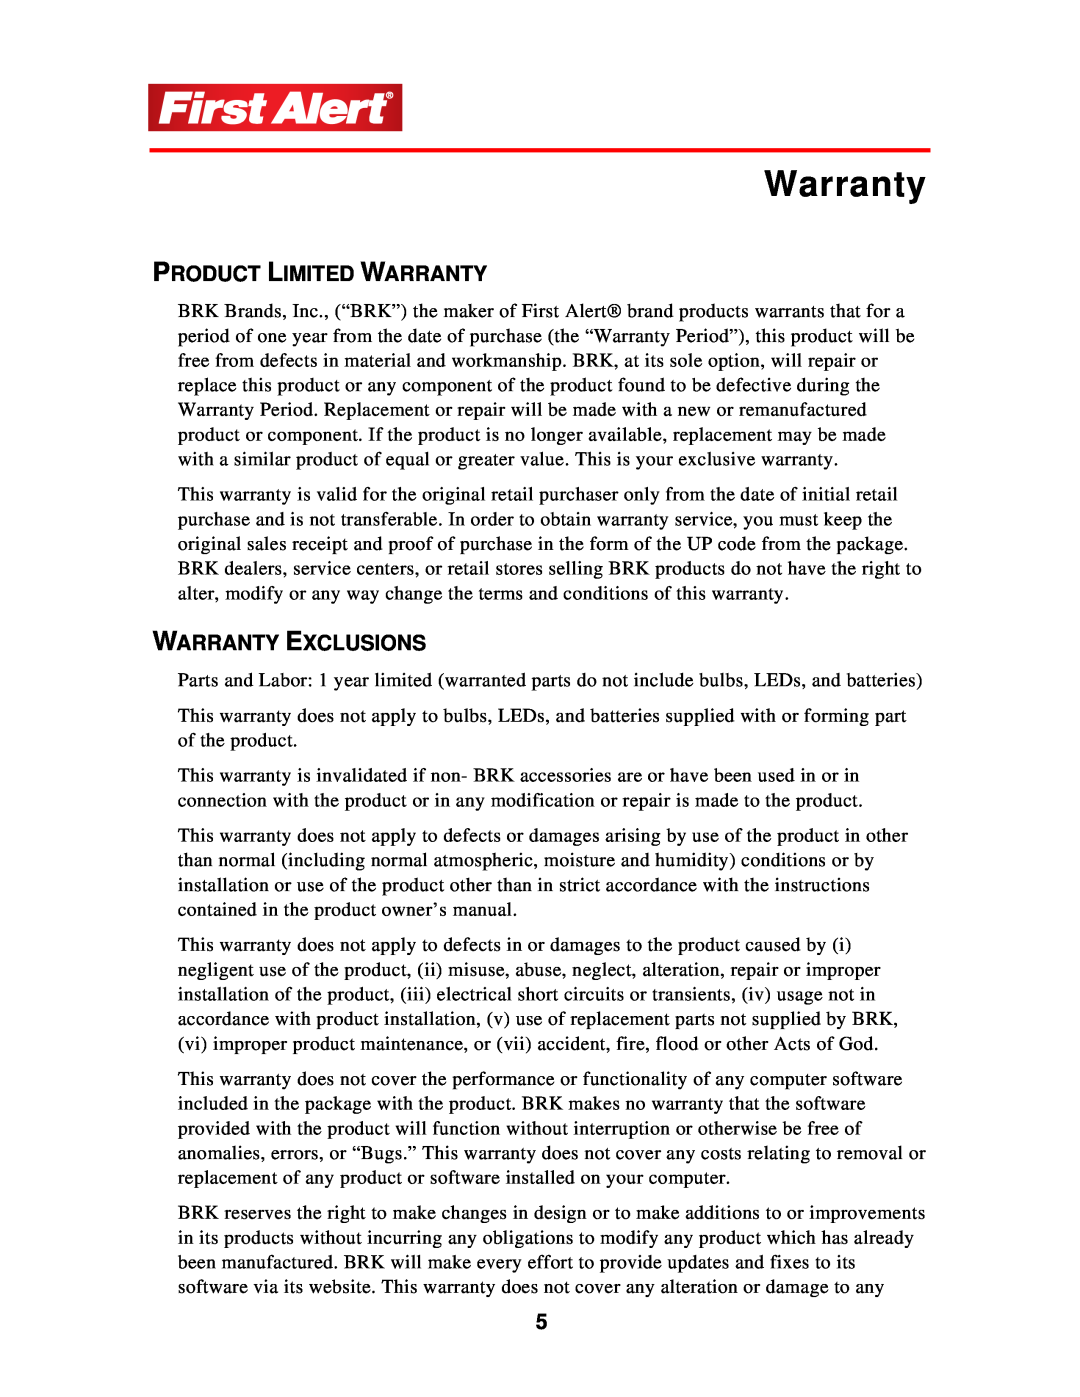 First Alert DC-1 user manual Product Limited Warranty, Warranty Exclusions 